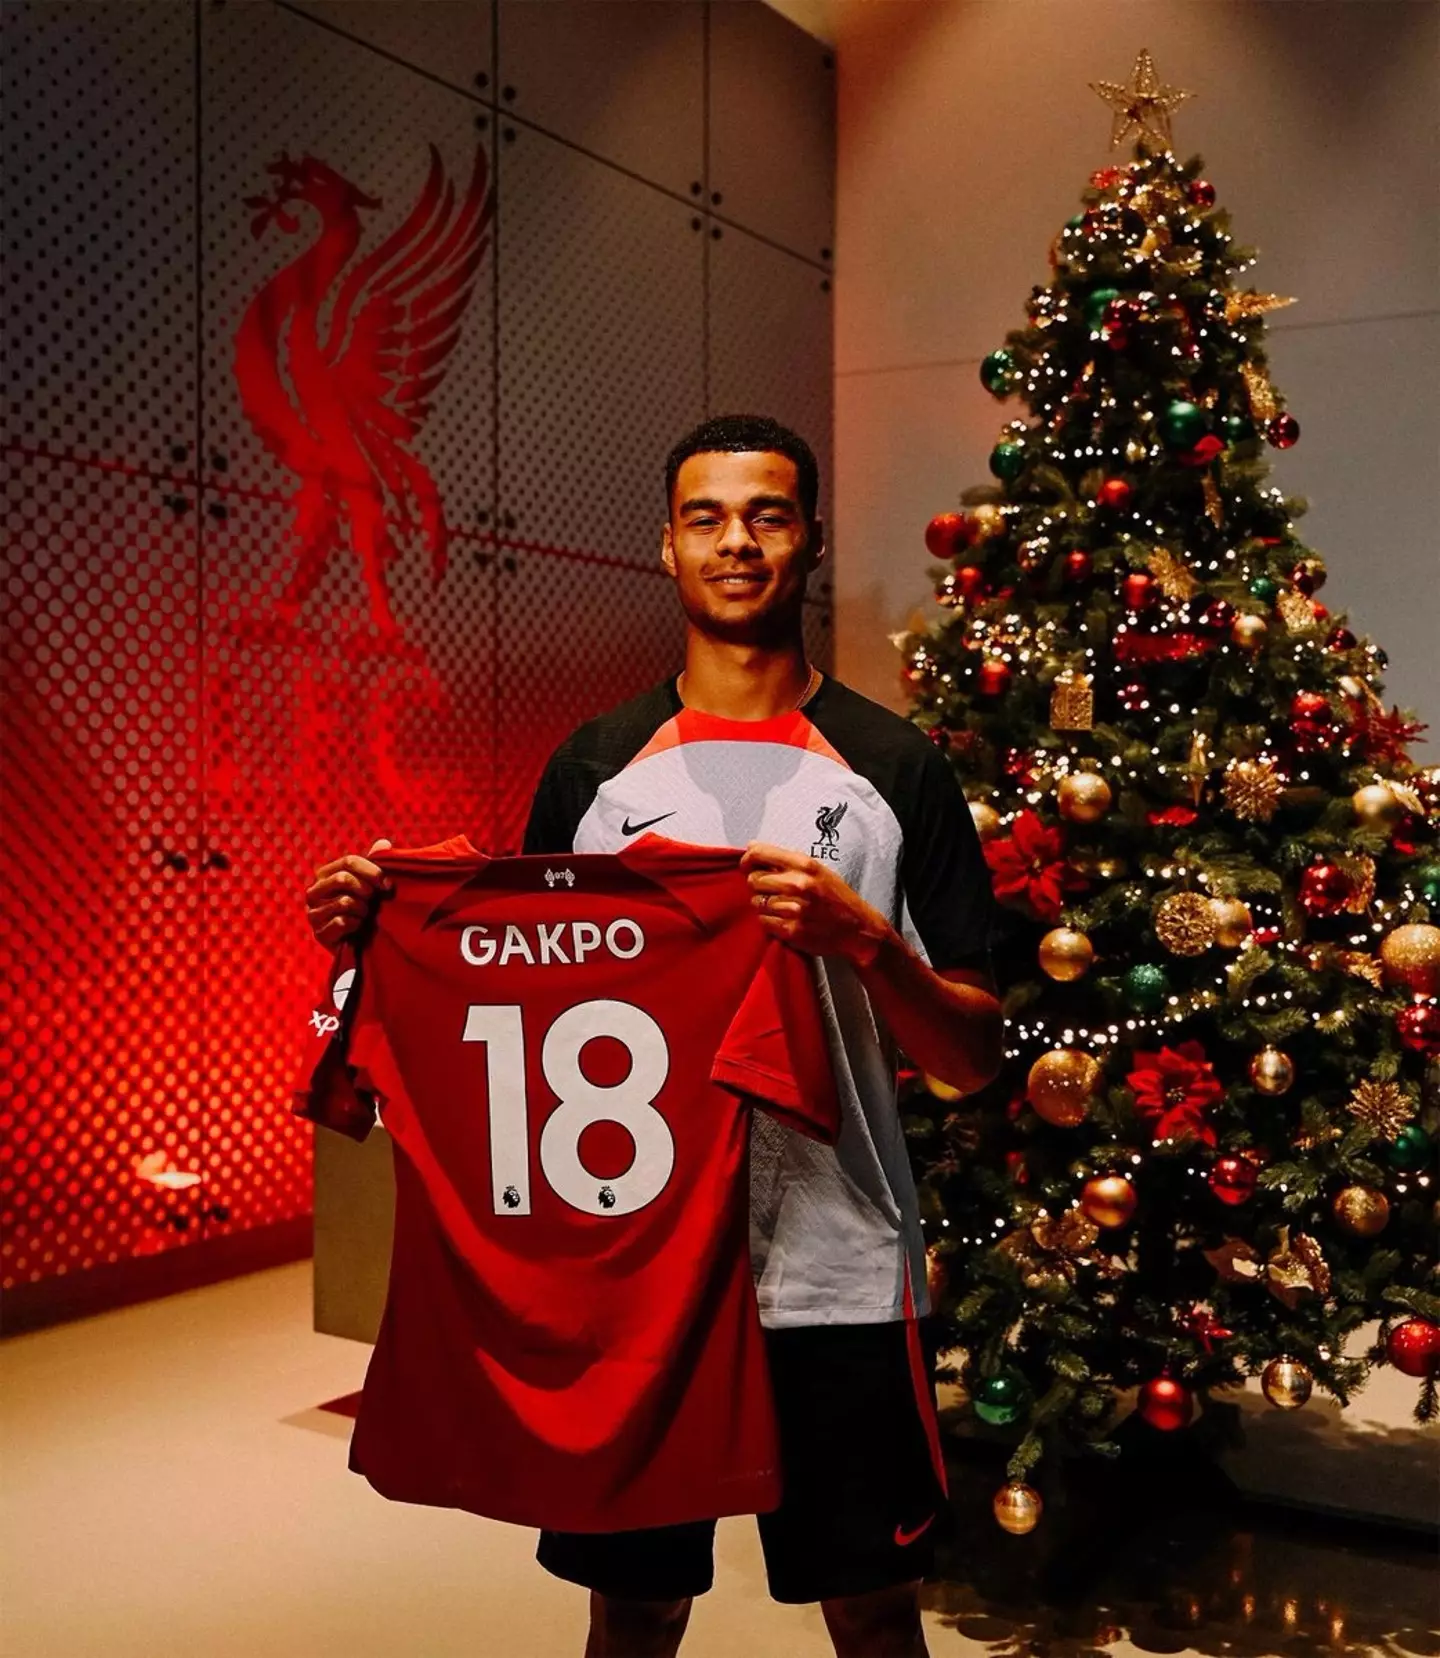 Gakpo with his new shirt. Image: Liverpool FC